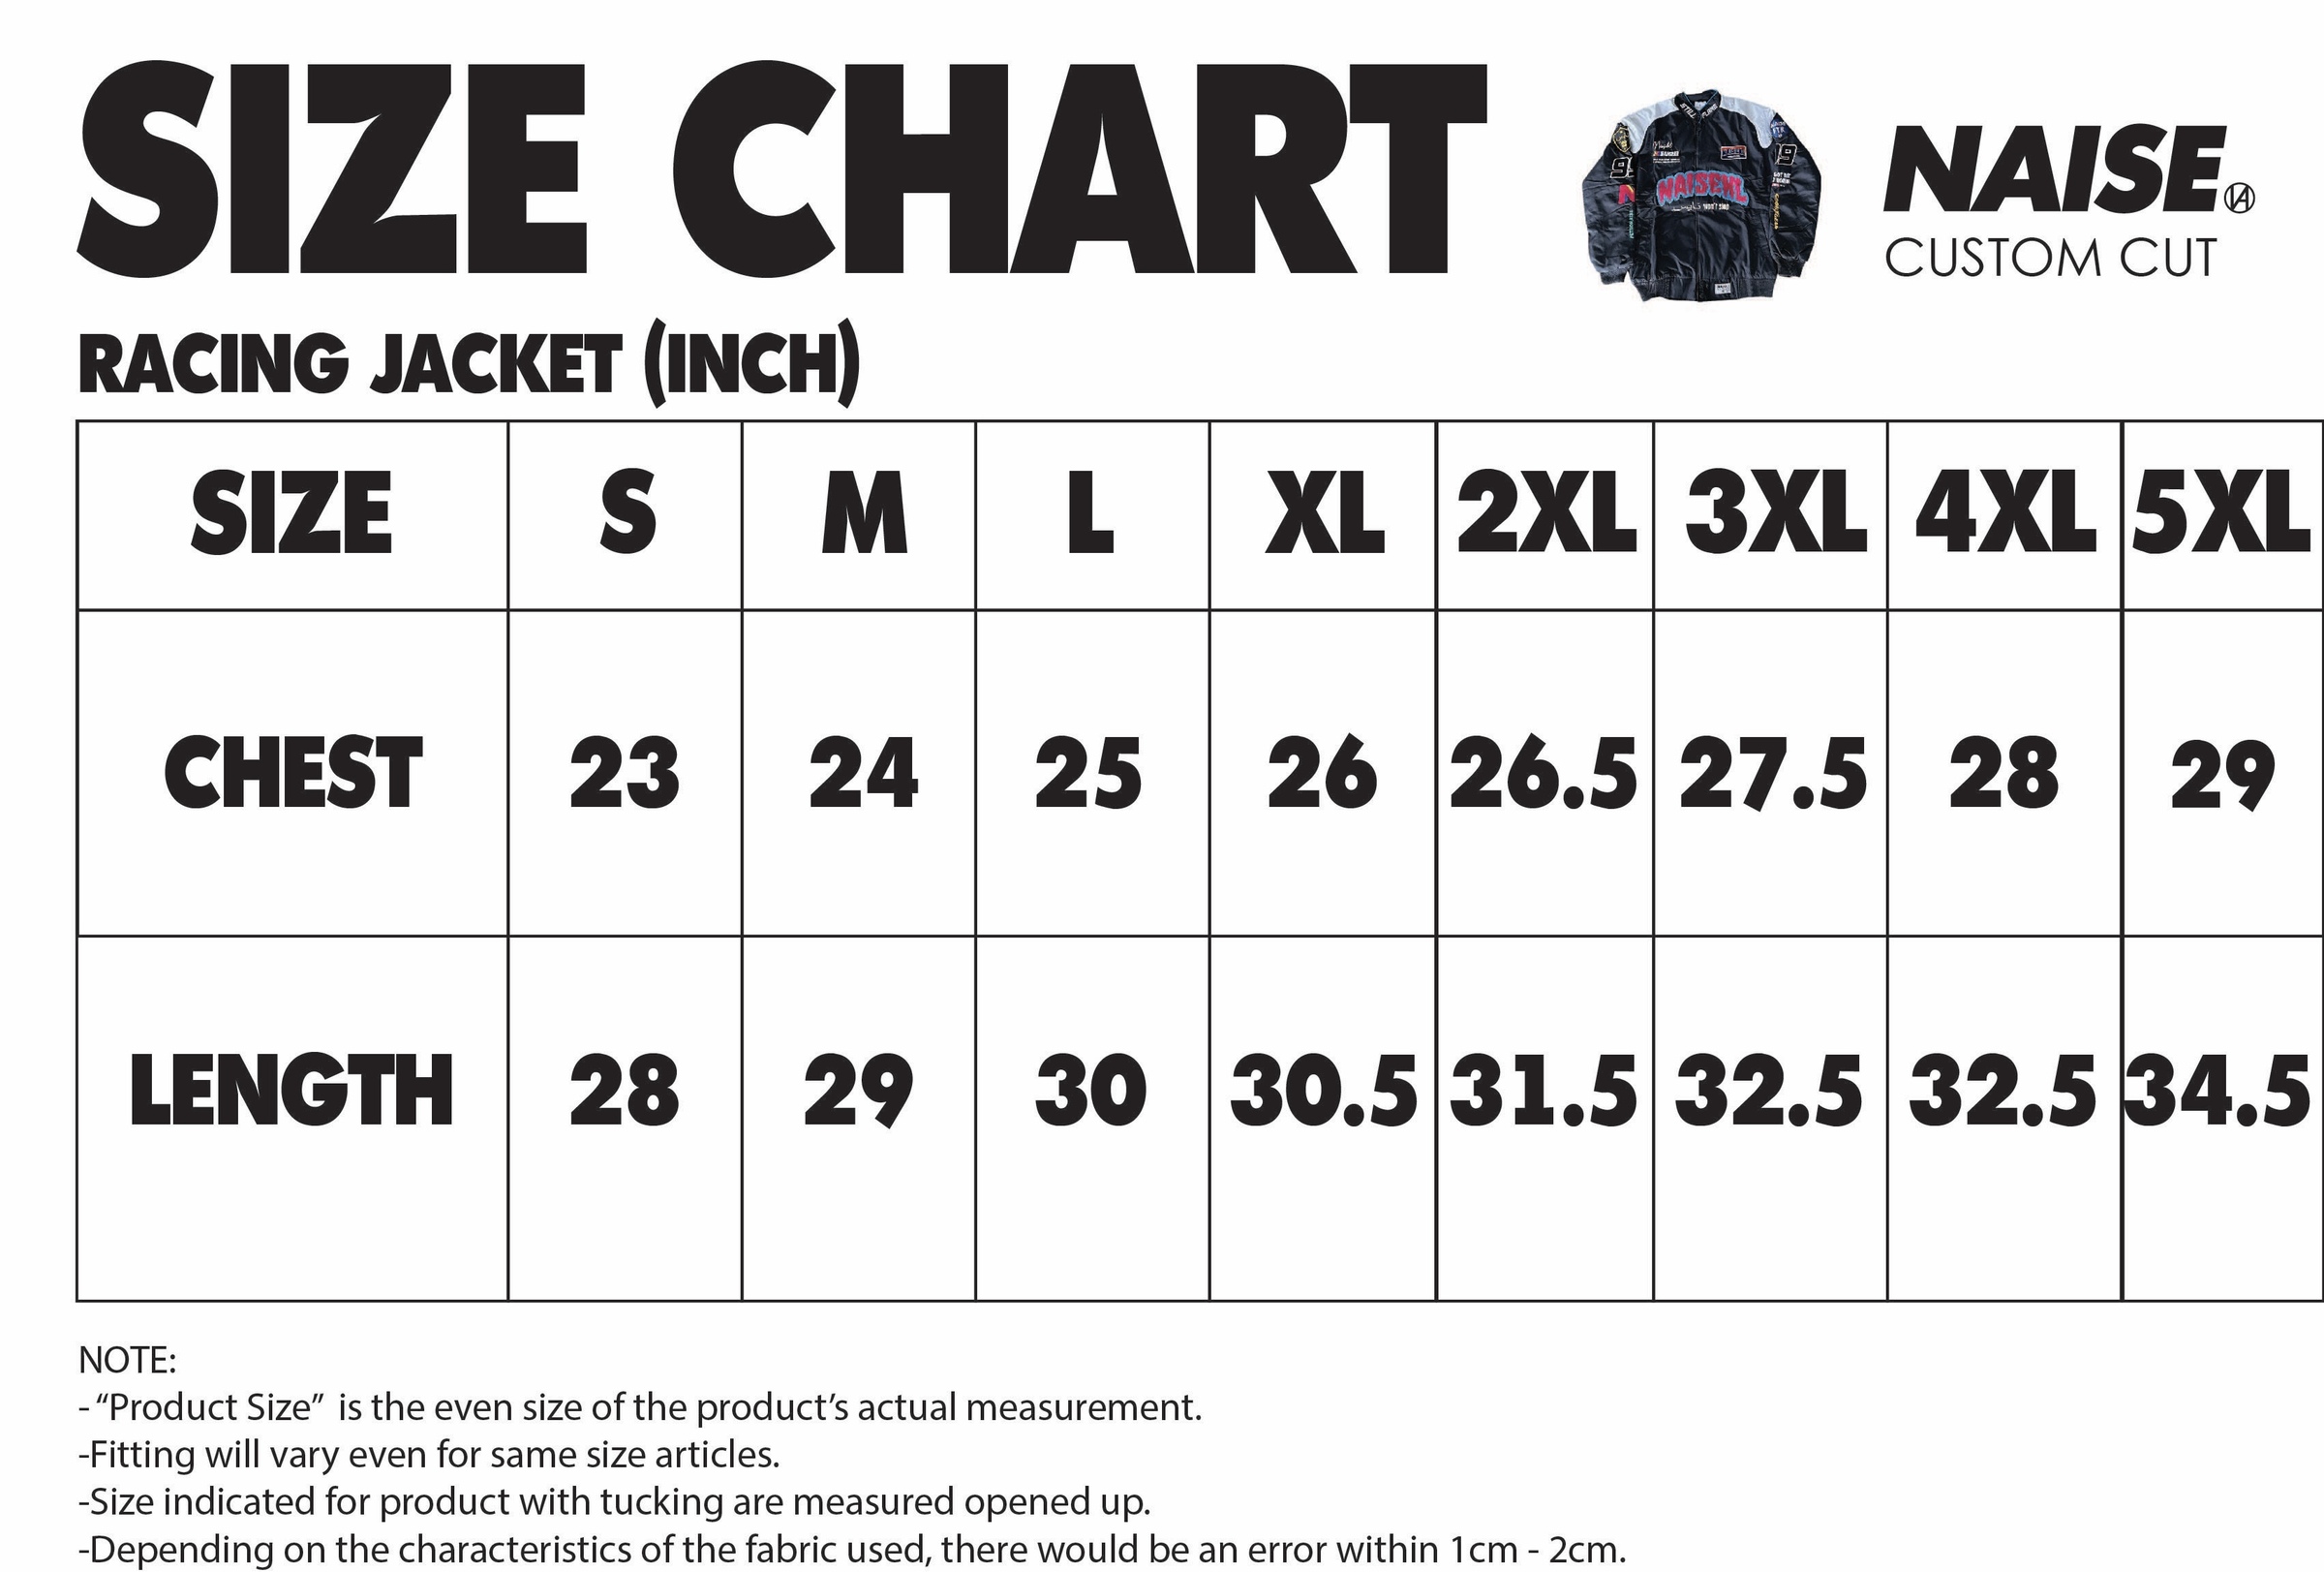 SIZE CHART RACING JACKET 2024 NOTE INCLUDED